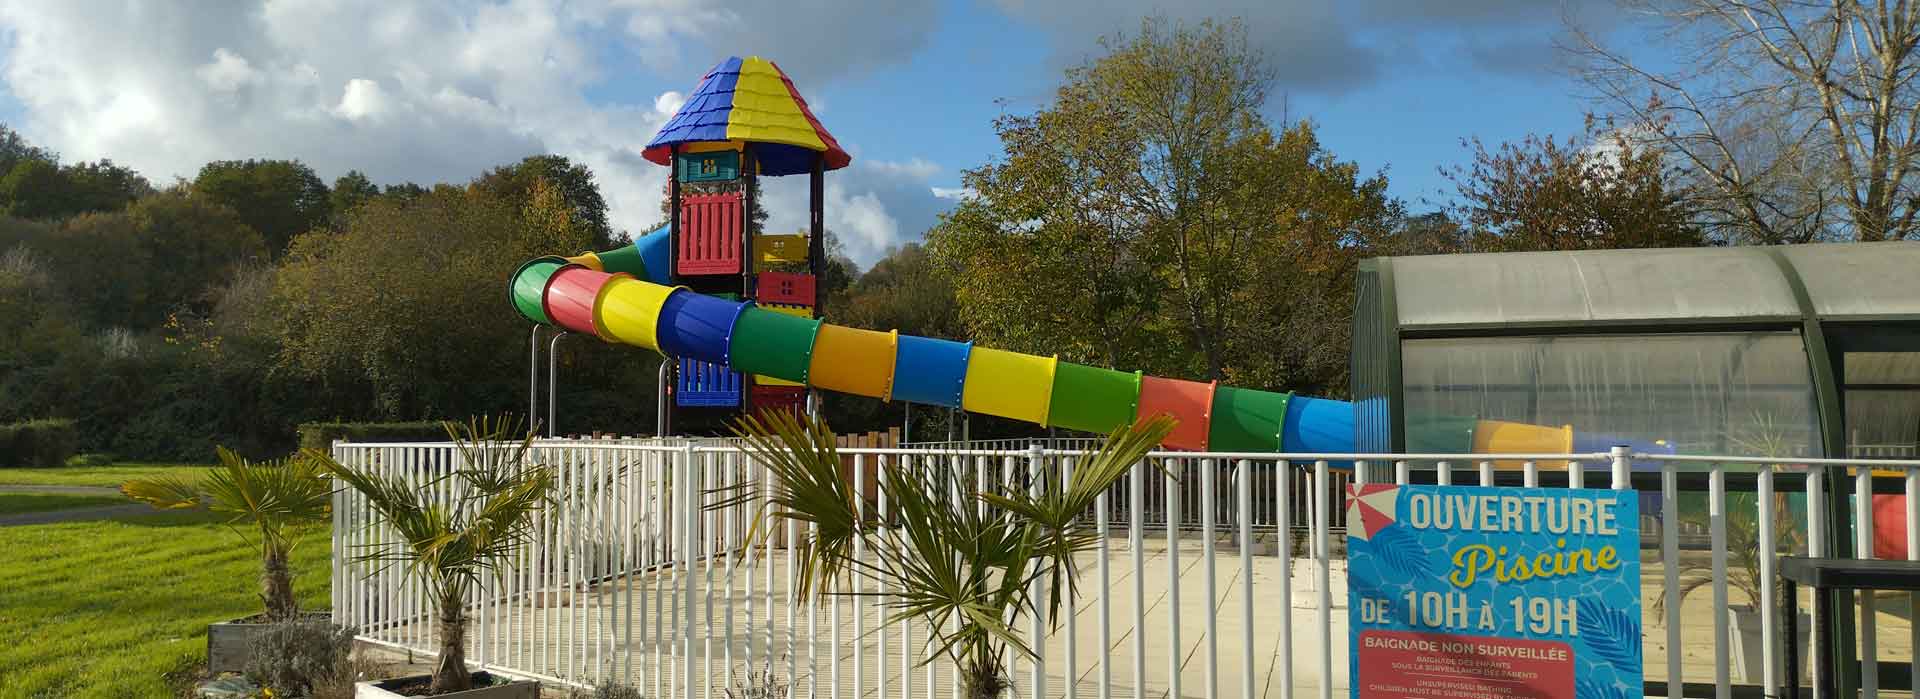 piscine couverte chauffée camping sarthe